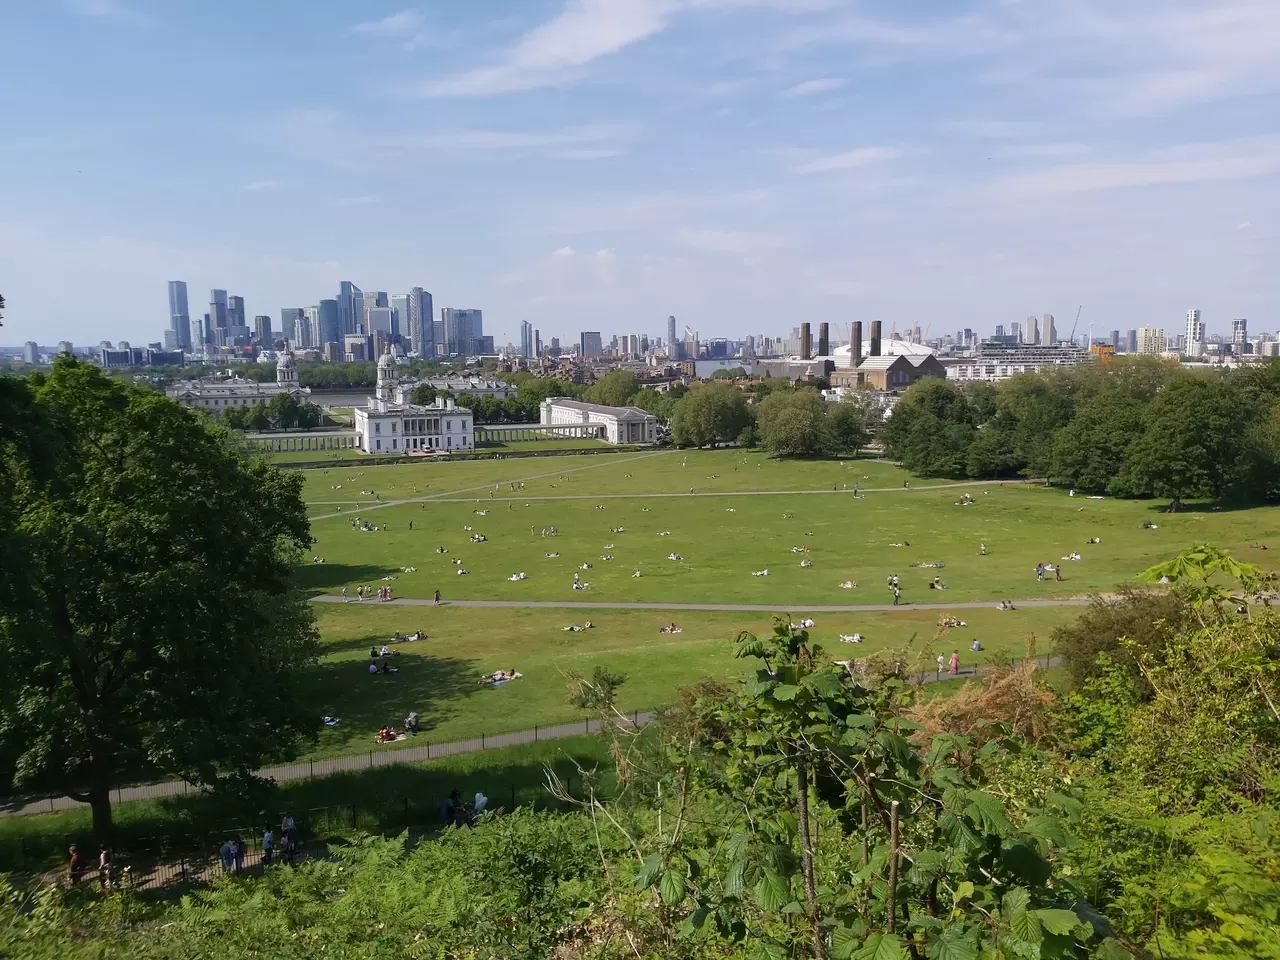 View from the Royal Observatory toward Queen's House and Canary Wharf